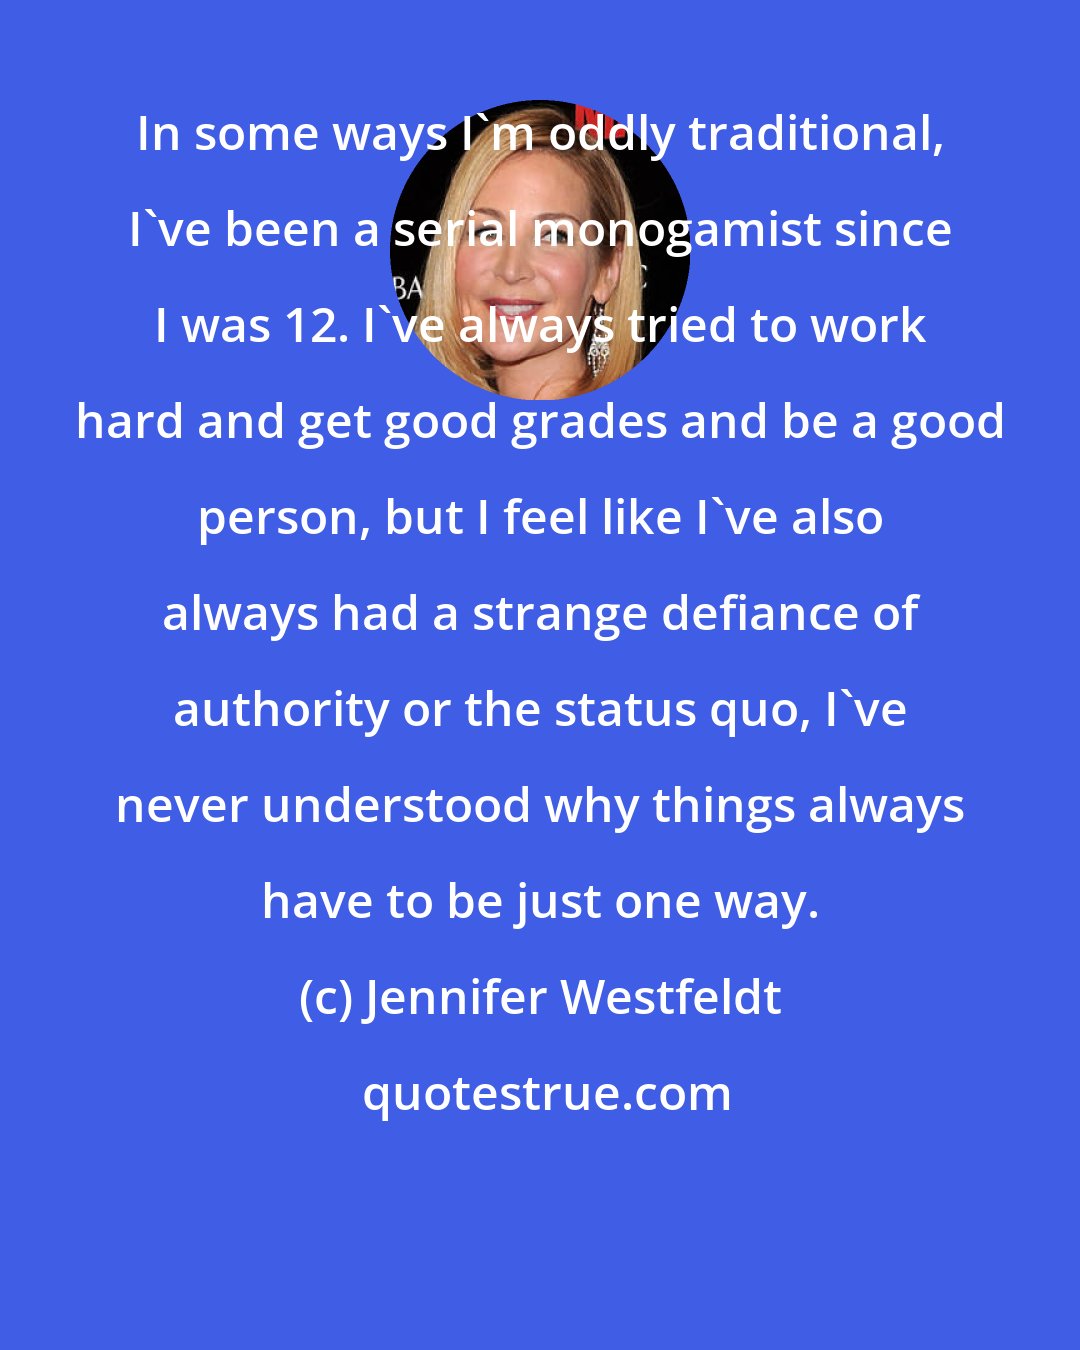 Jennifer Westfeldt: In some ways I'm oddly traditional, I've been a serial monogamist since I was 12. I've always tried to work hard and get good grades and be a good person, but I feel like I've also always had a strange defiance of authority or the status quo, I've never understood why things always have to be just one way.